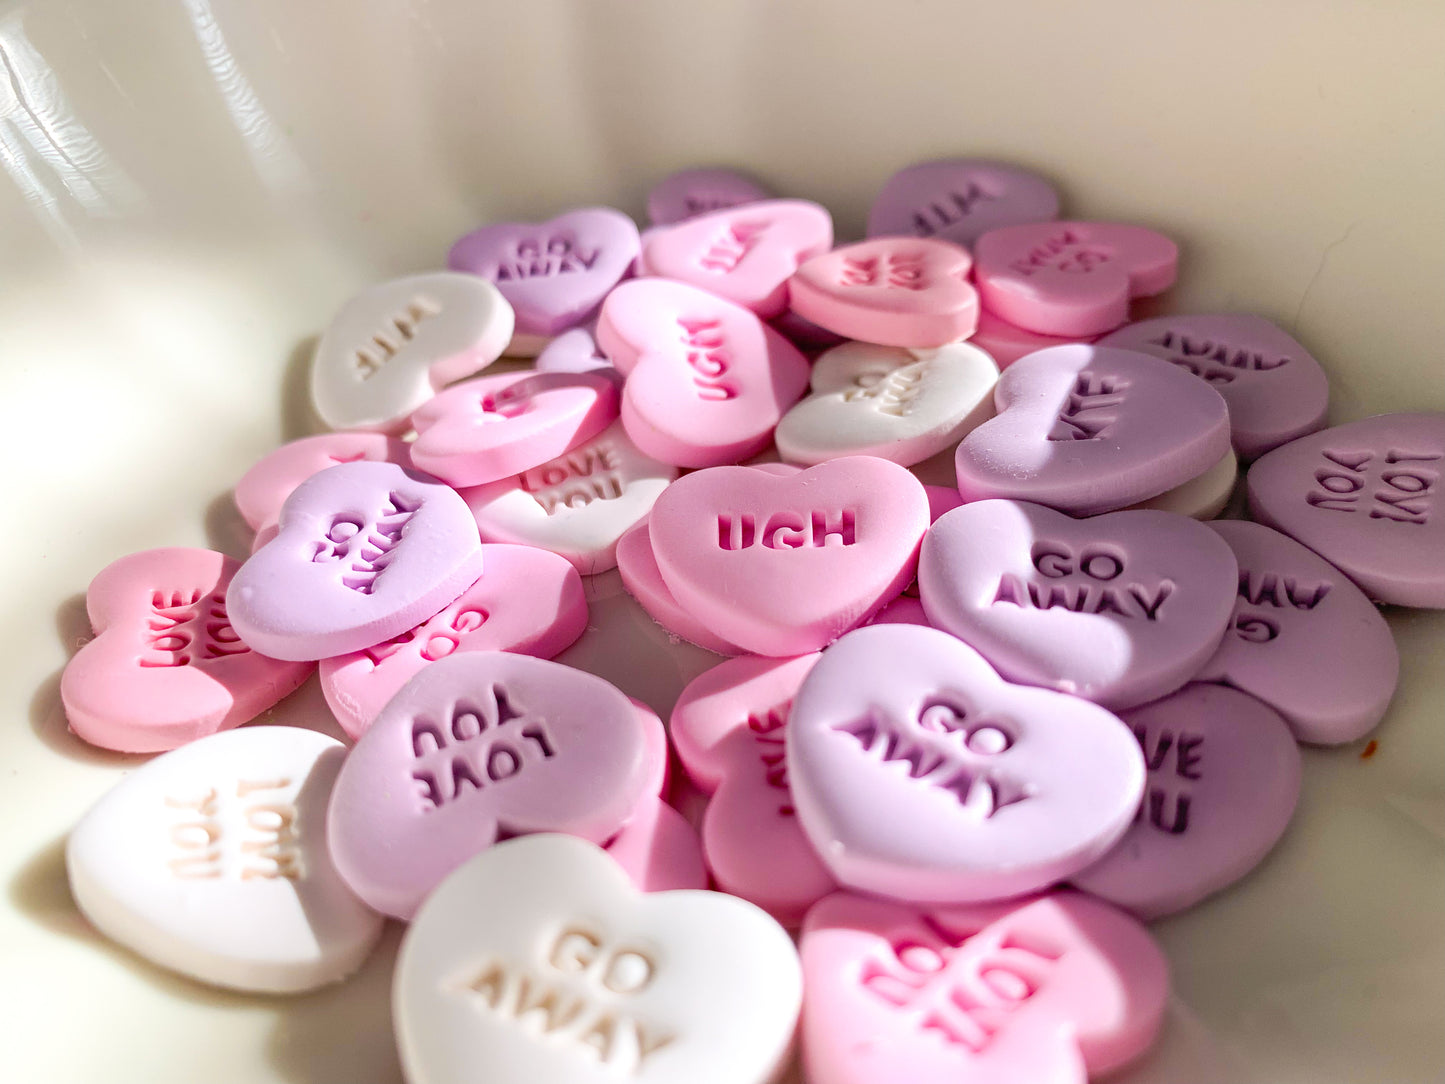 Candy "GO AWAY" Hearts